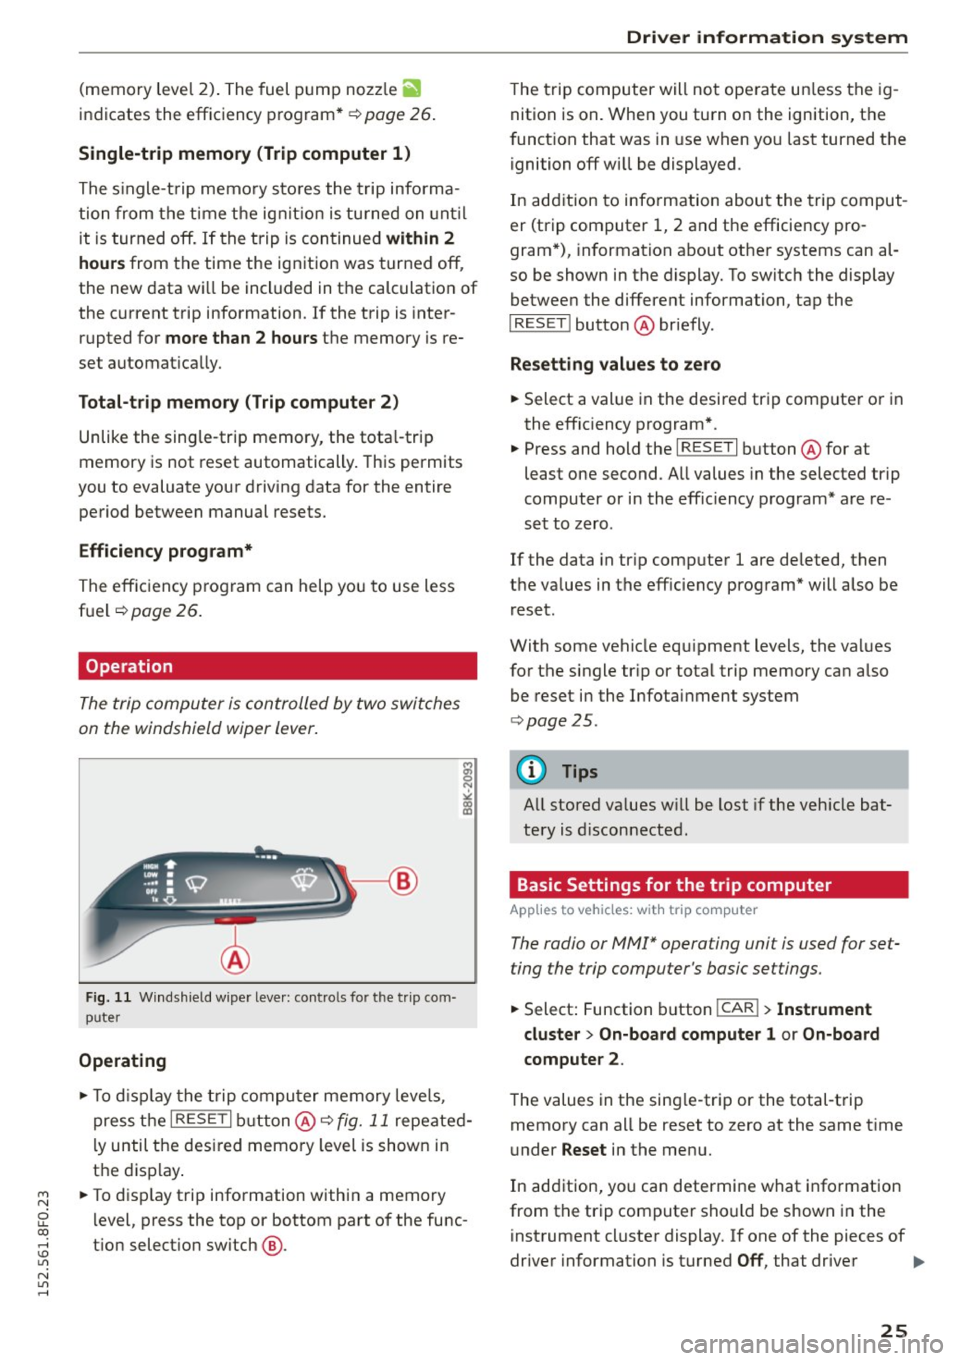 AUDI A5 CABRIOLET 2015  Owners Manual M N 
ci u.. co ,...., \!) 1.11 
N 1.11 ,...., 
(memory  level  2). The fuel  pump  nozz le iii 
indicates  the  efficiency  program*¢ page 26. 
Single-t rip memory  (Trip  computer  1 ) 
The single